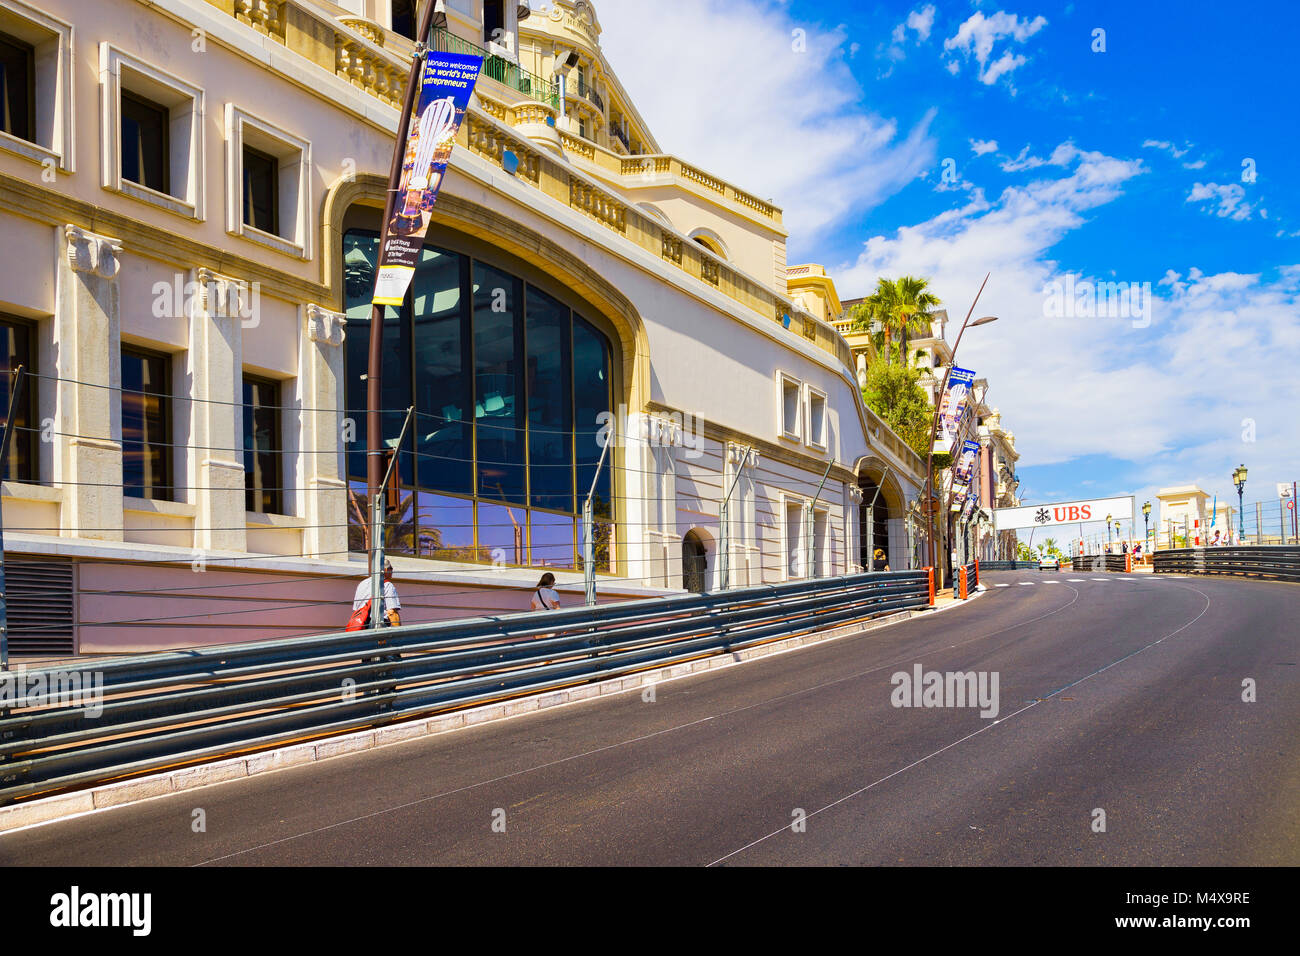 MONTE CARLO / MONACO - JUNE 02, 2013: Street of Monaco used for F1 Gran Prix motor race and tourists on the sides of the road. Stock Photo